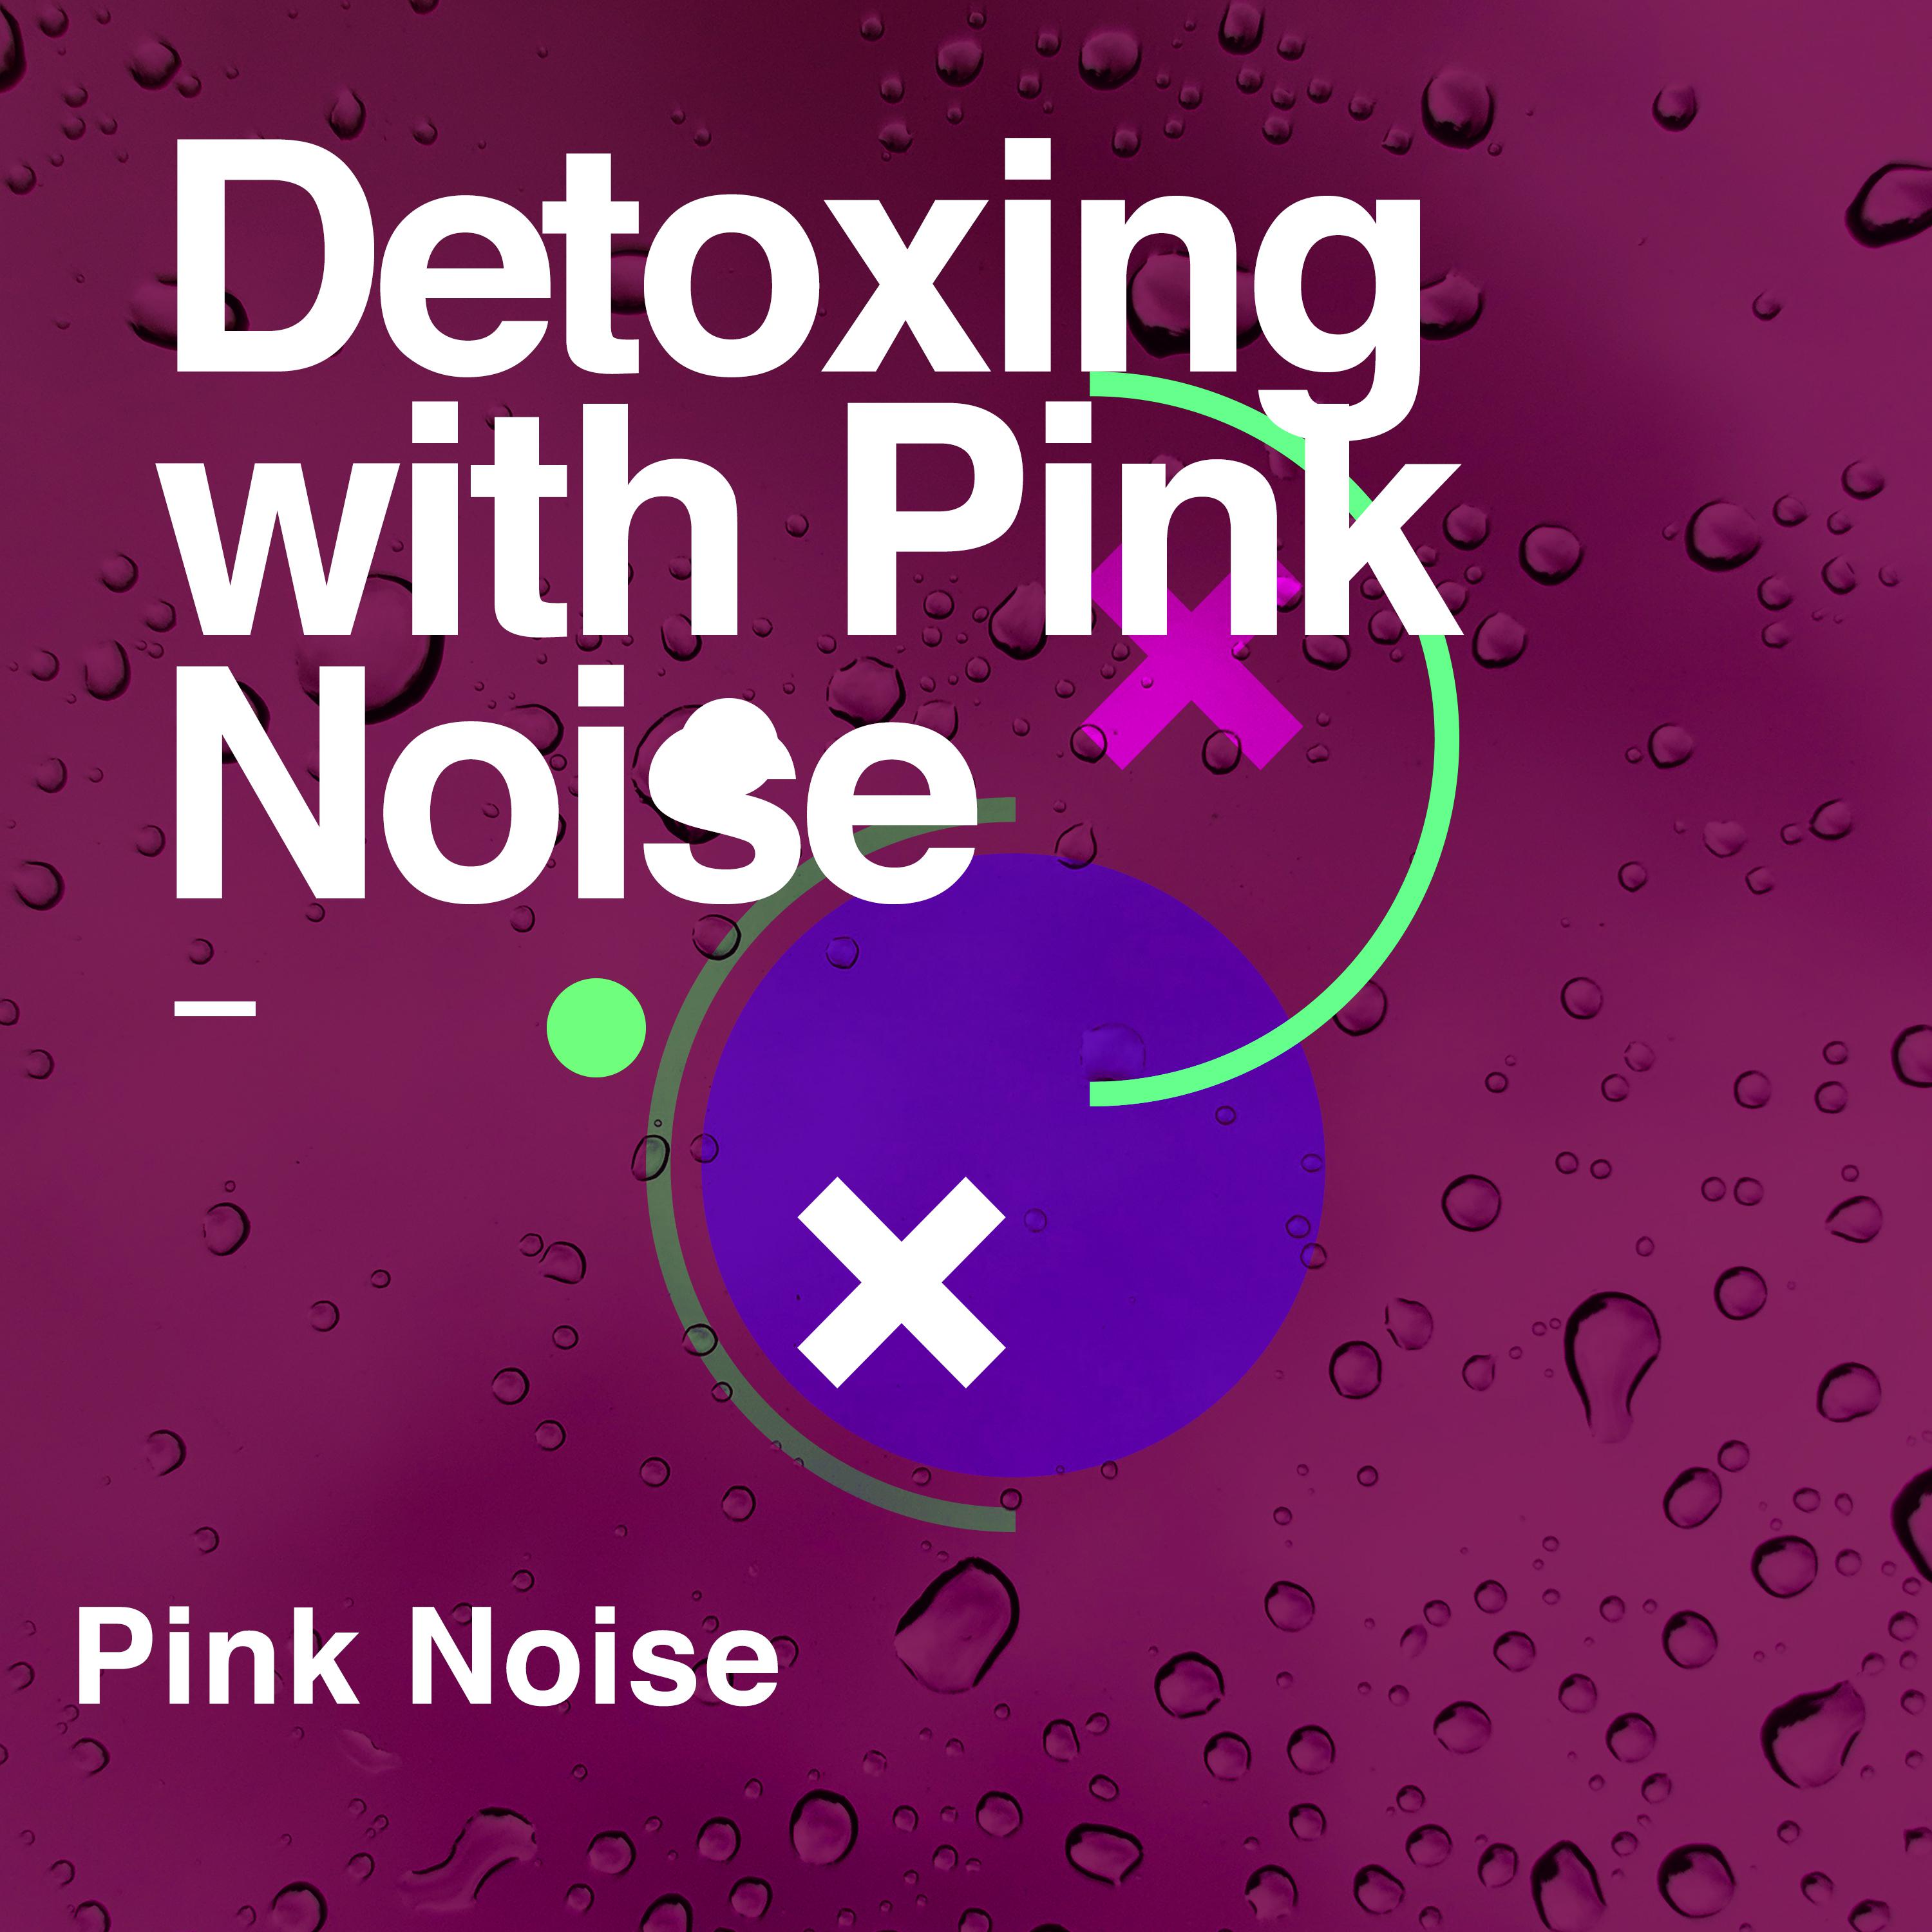 Detoxing with Pink Noise